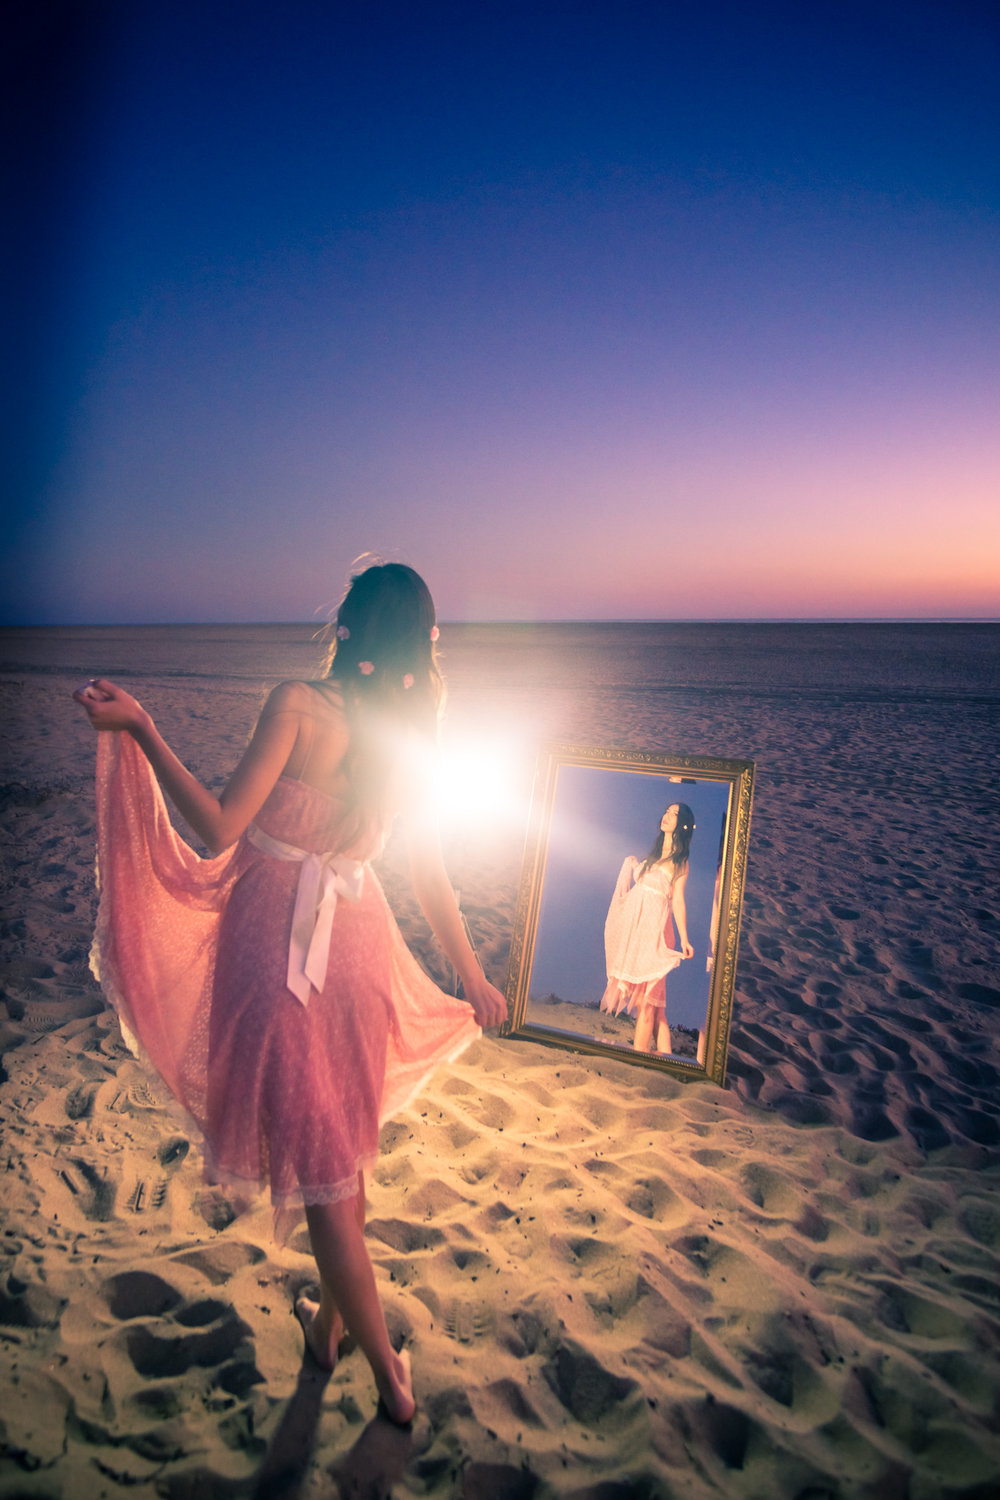 Portrait of a Lady in mirror wearing a pink dress at sunset  on Balboa Island in Newport Beach California By Joseph Barber photography